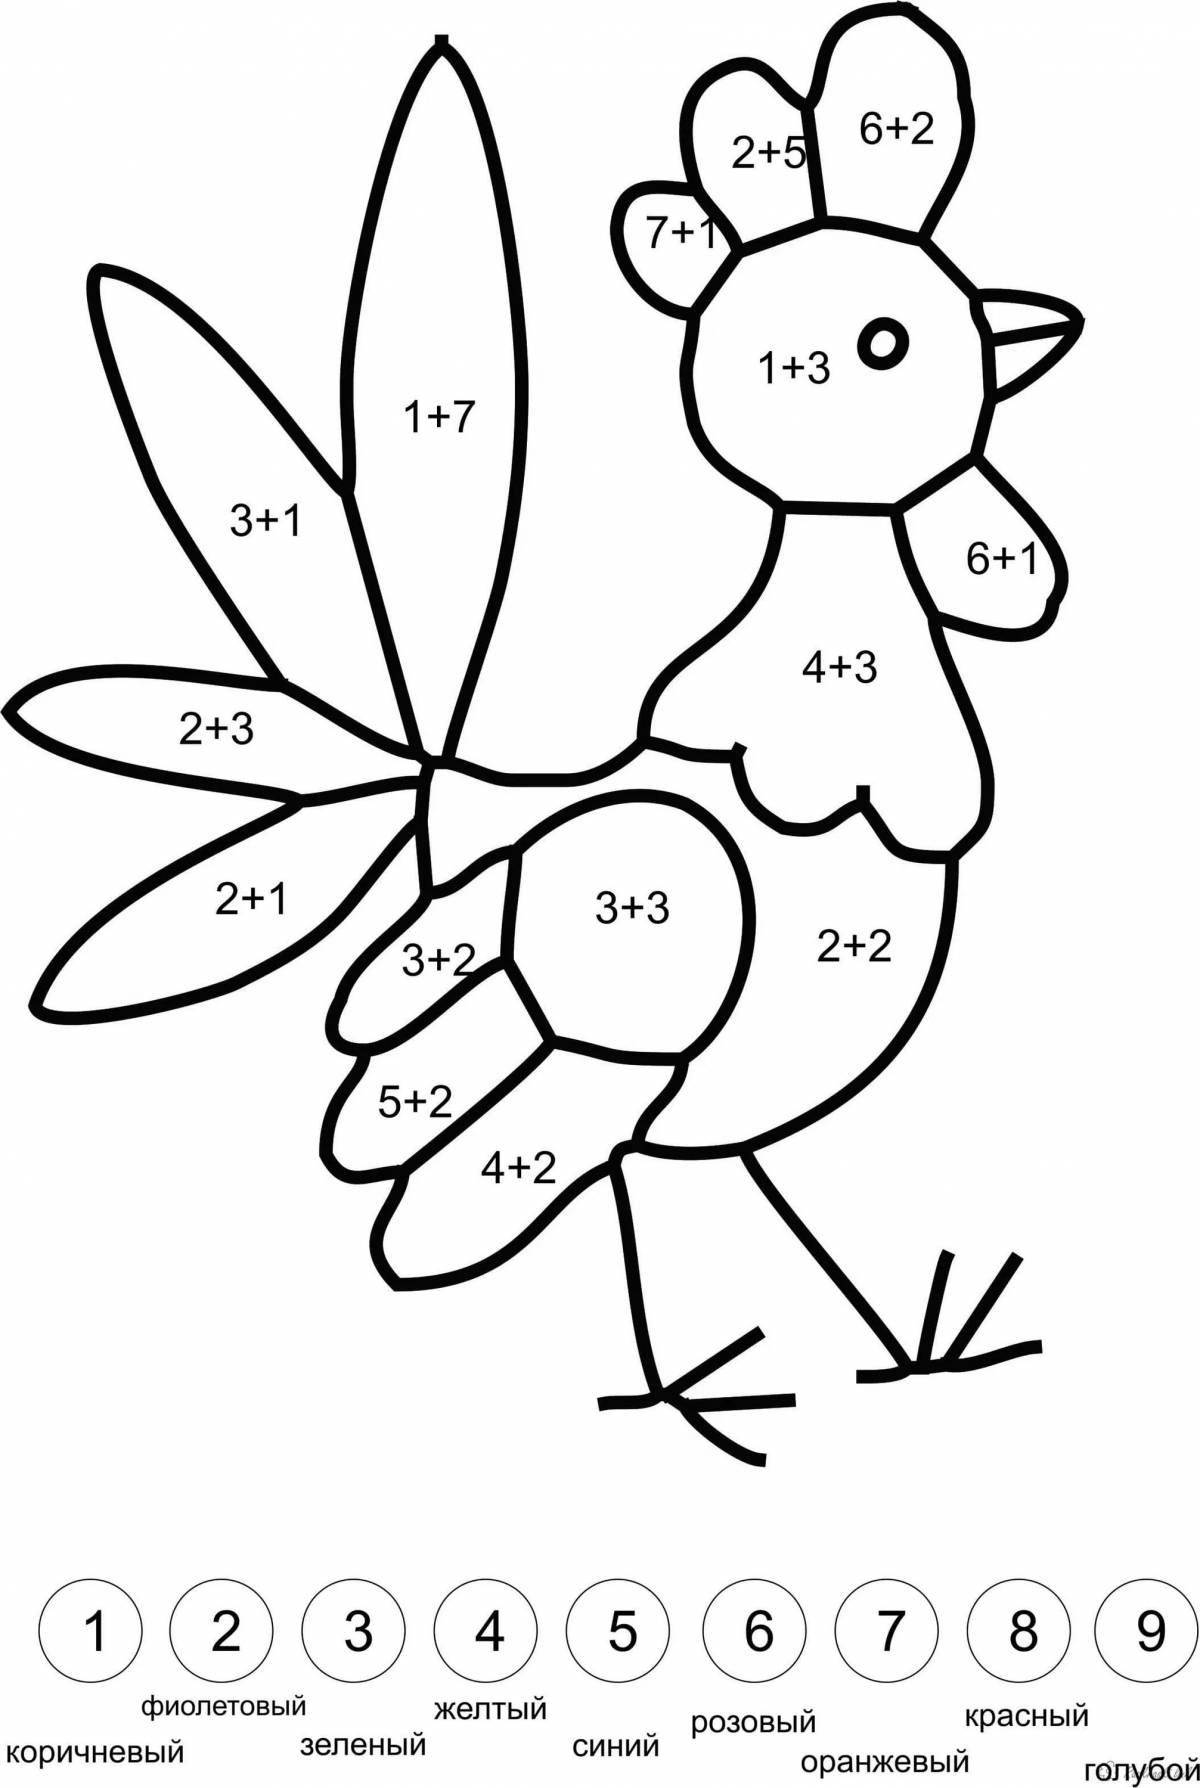 Joyful addition and subtraction coloring book